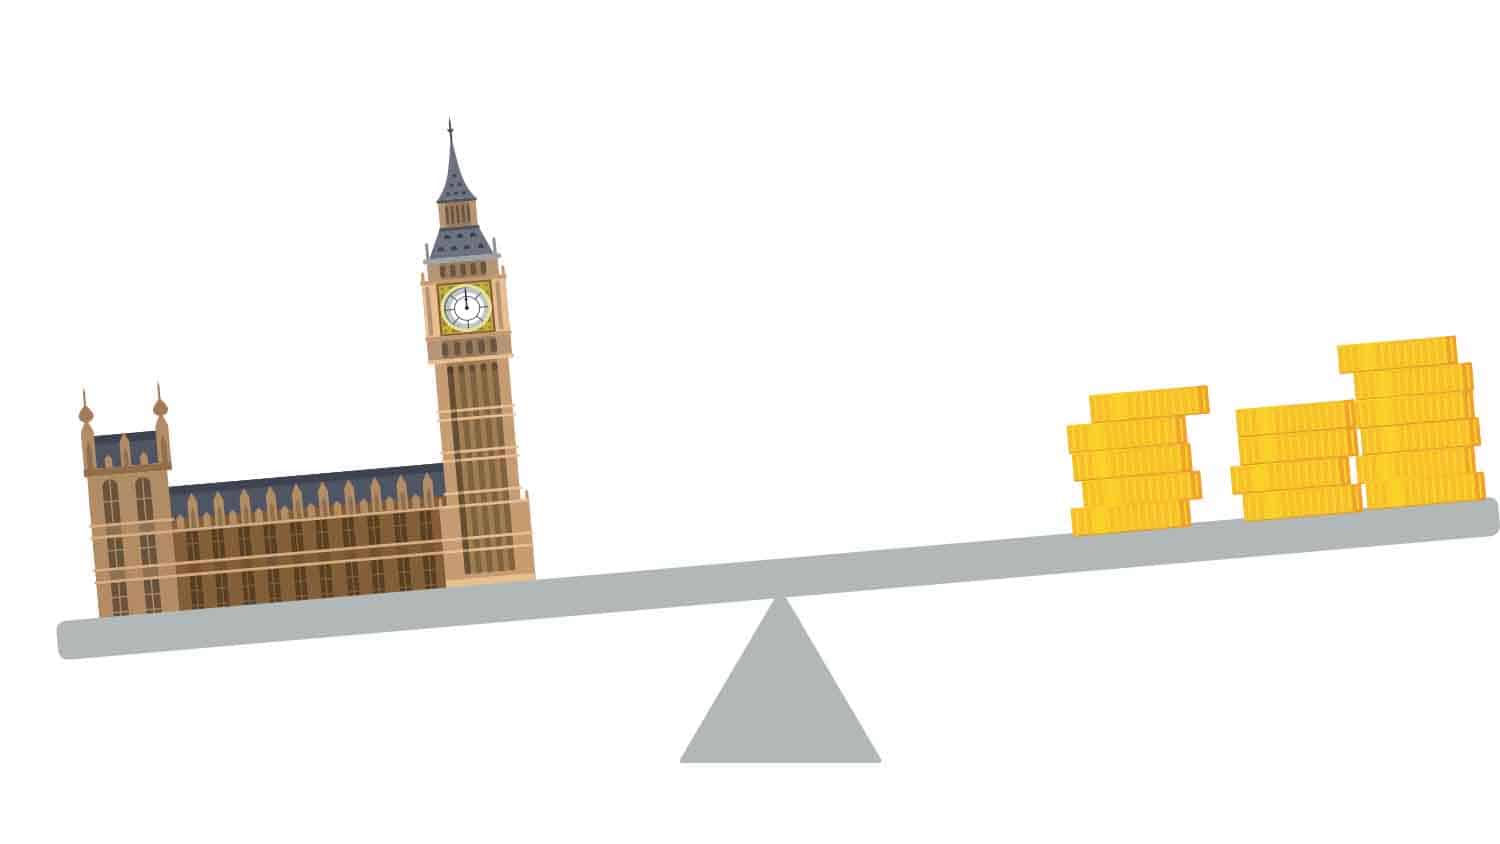 Parliament and money scales